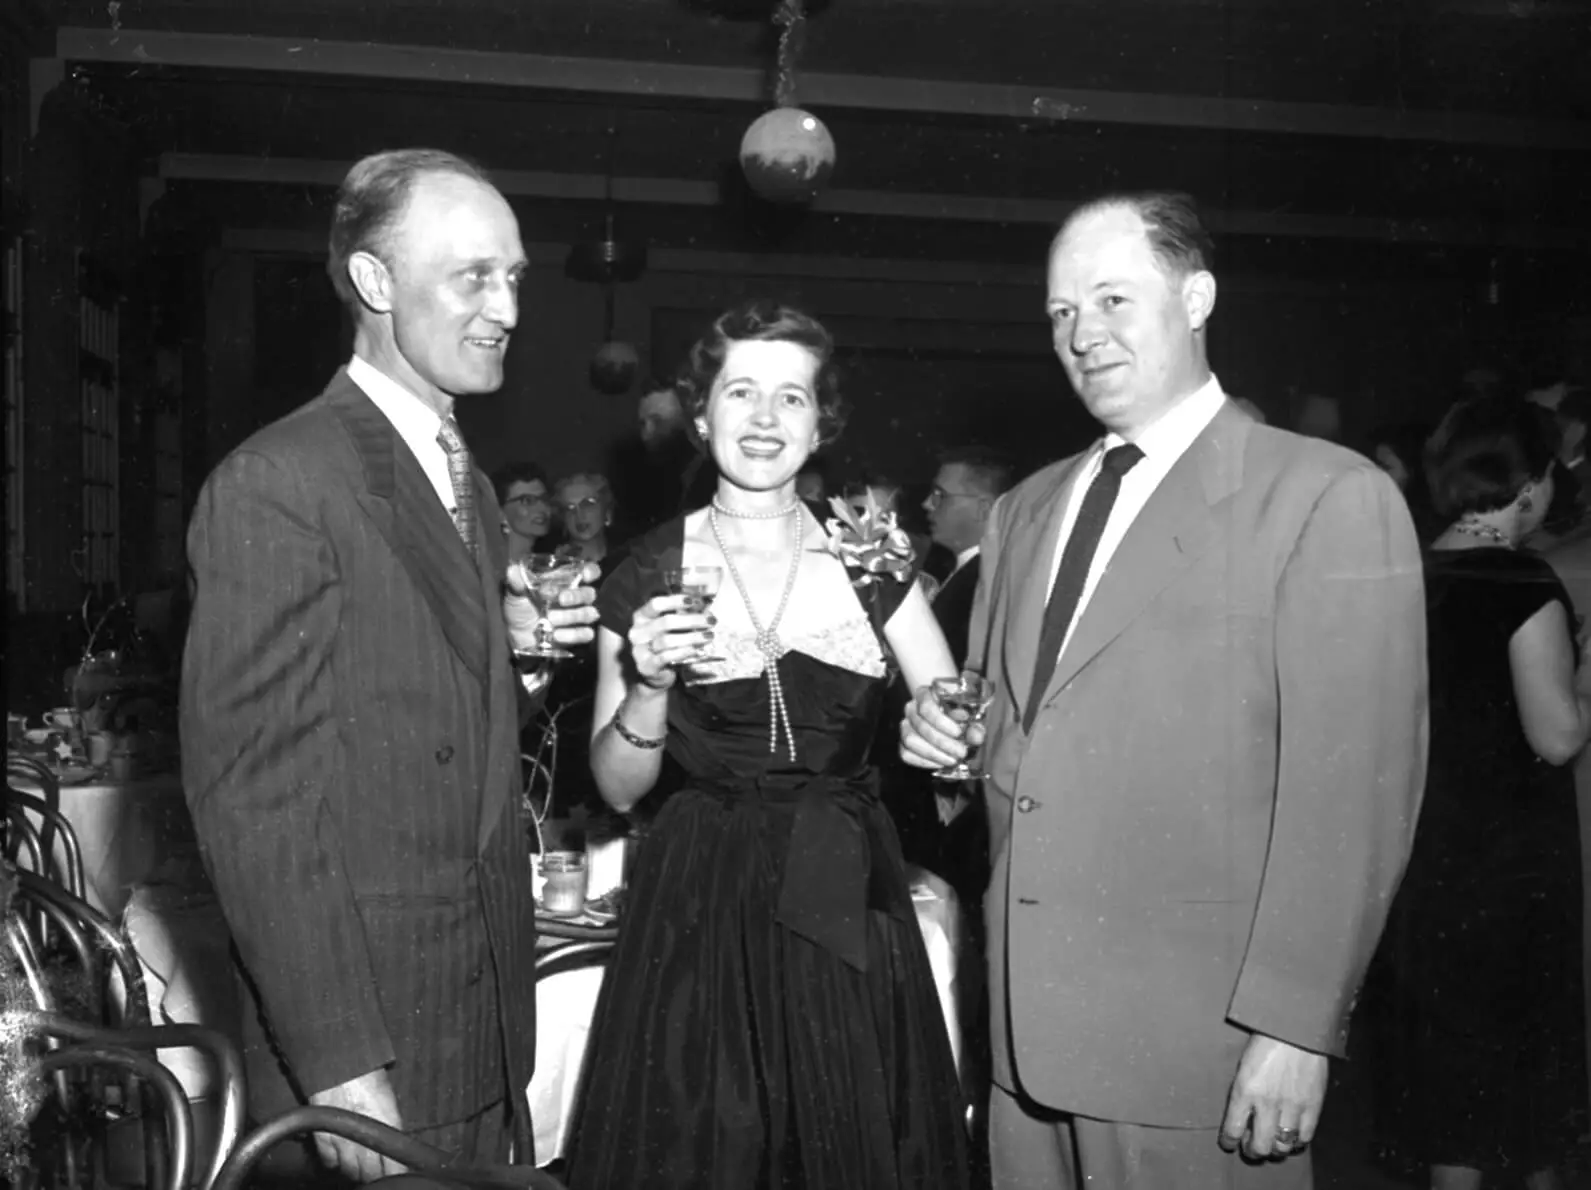 Black and white photo of Proctor Brown and a couple composed of a tall balding man in a suit and woman with parted hair in a dark dress, conversing at a party.